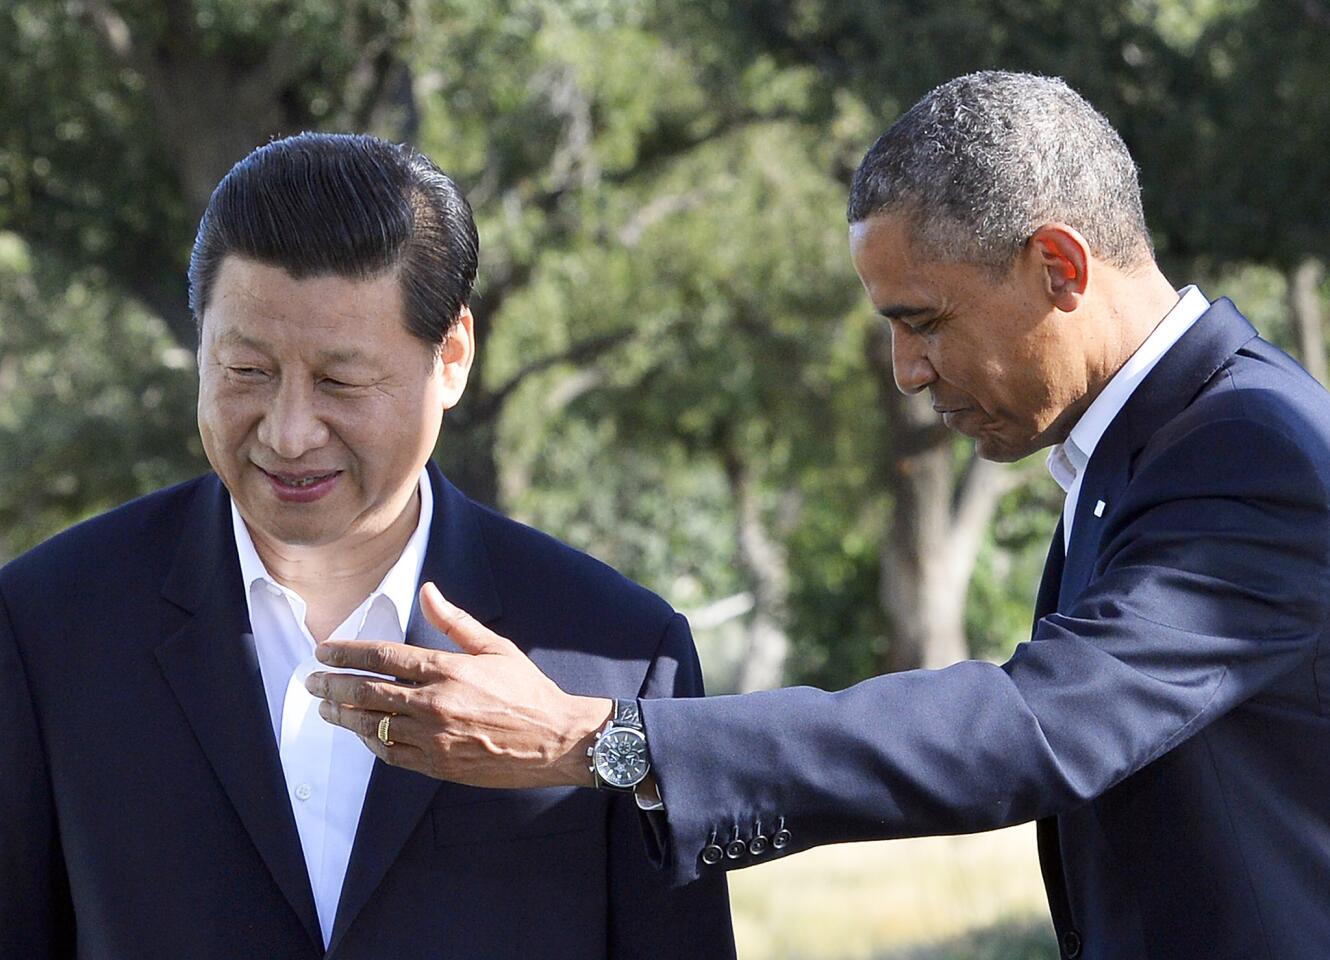 US President Barack Obama and Chinese President Xi Jinping head for their bilateral meeting at the Annenberg Retreat at Sunnylands in Rancho Mirage, California, on June 7, 2013. Ditching the crushing formality of US-China summits, Xi and Obama met in Rancho Mirage, California, a playground of past presidents and the powerful. Allegations of Chinese cyber hacking and espionage, North Korea's nuclear defiance and constant trade niggles between the world's two single largest economies and possible future superpower rivals will dominate the talks.